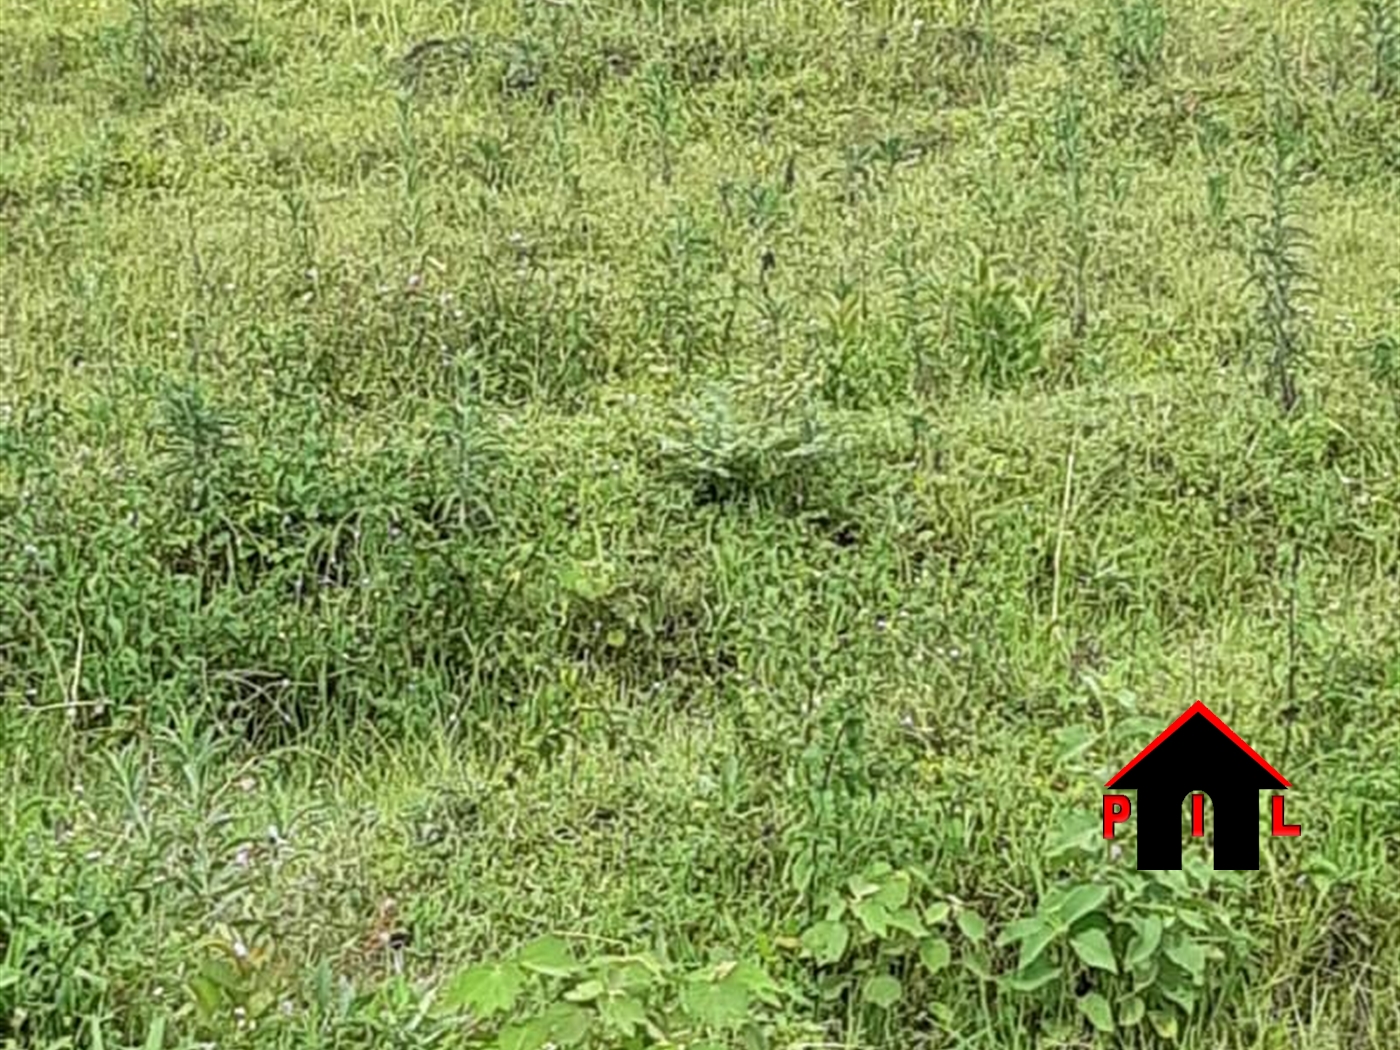 Agricultural Land for sale in Nkozi Mpigi